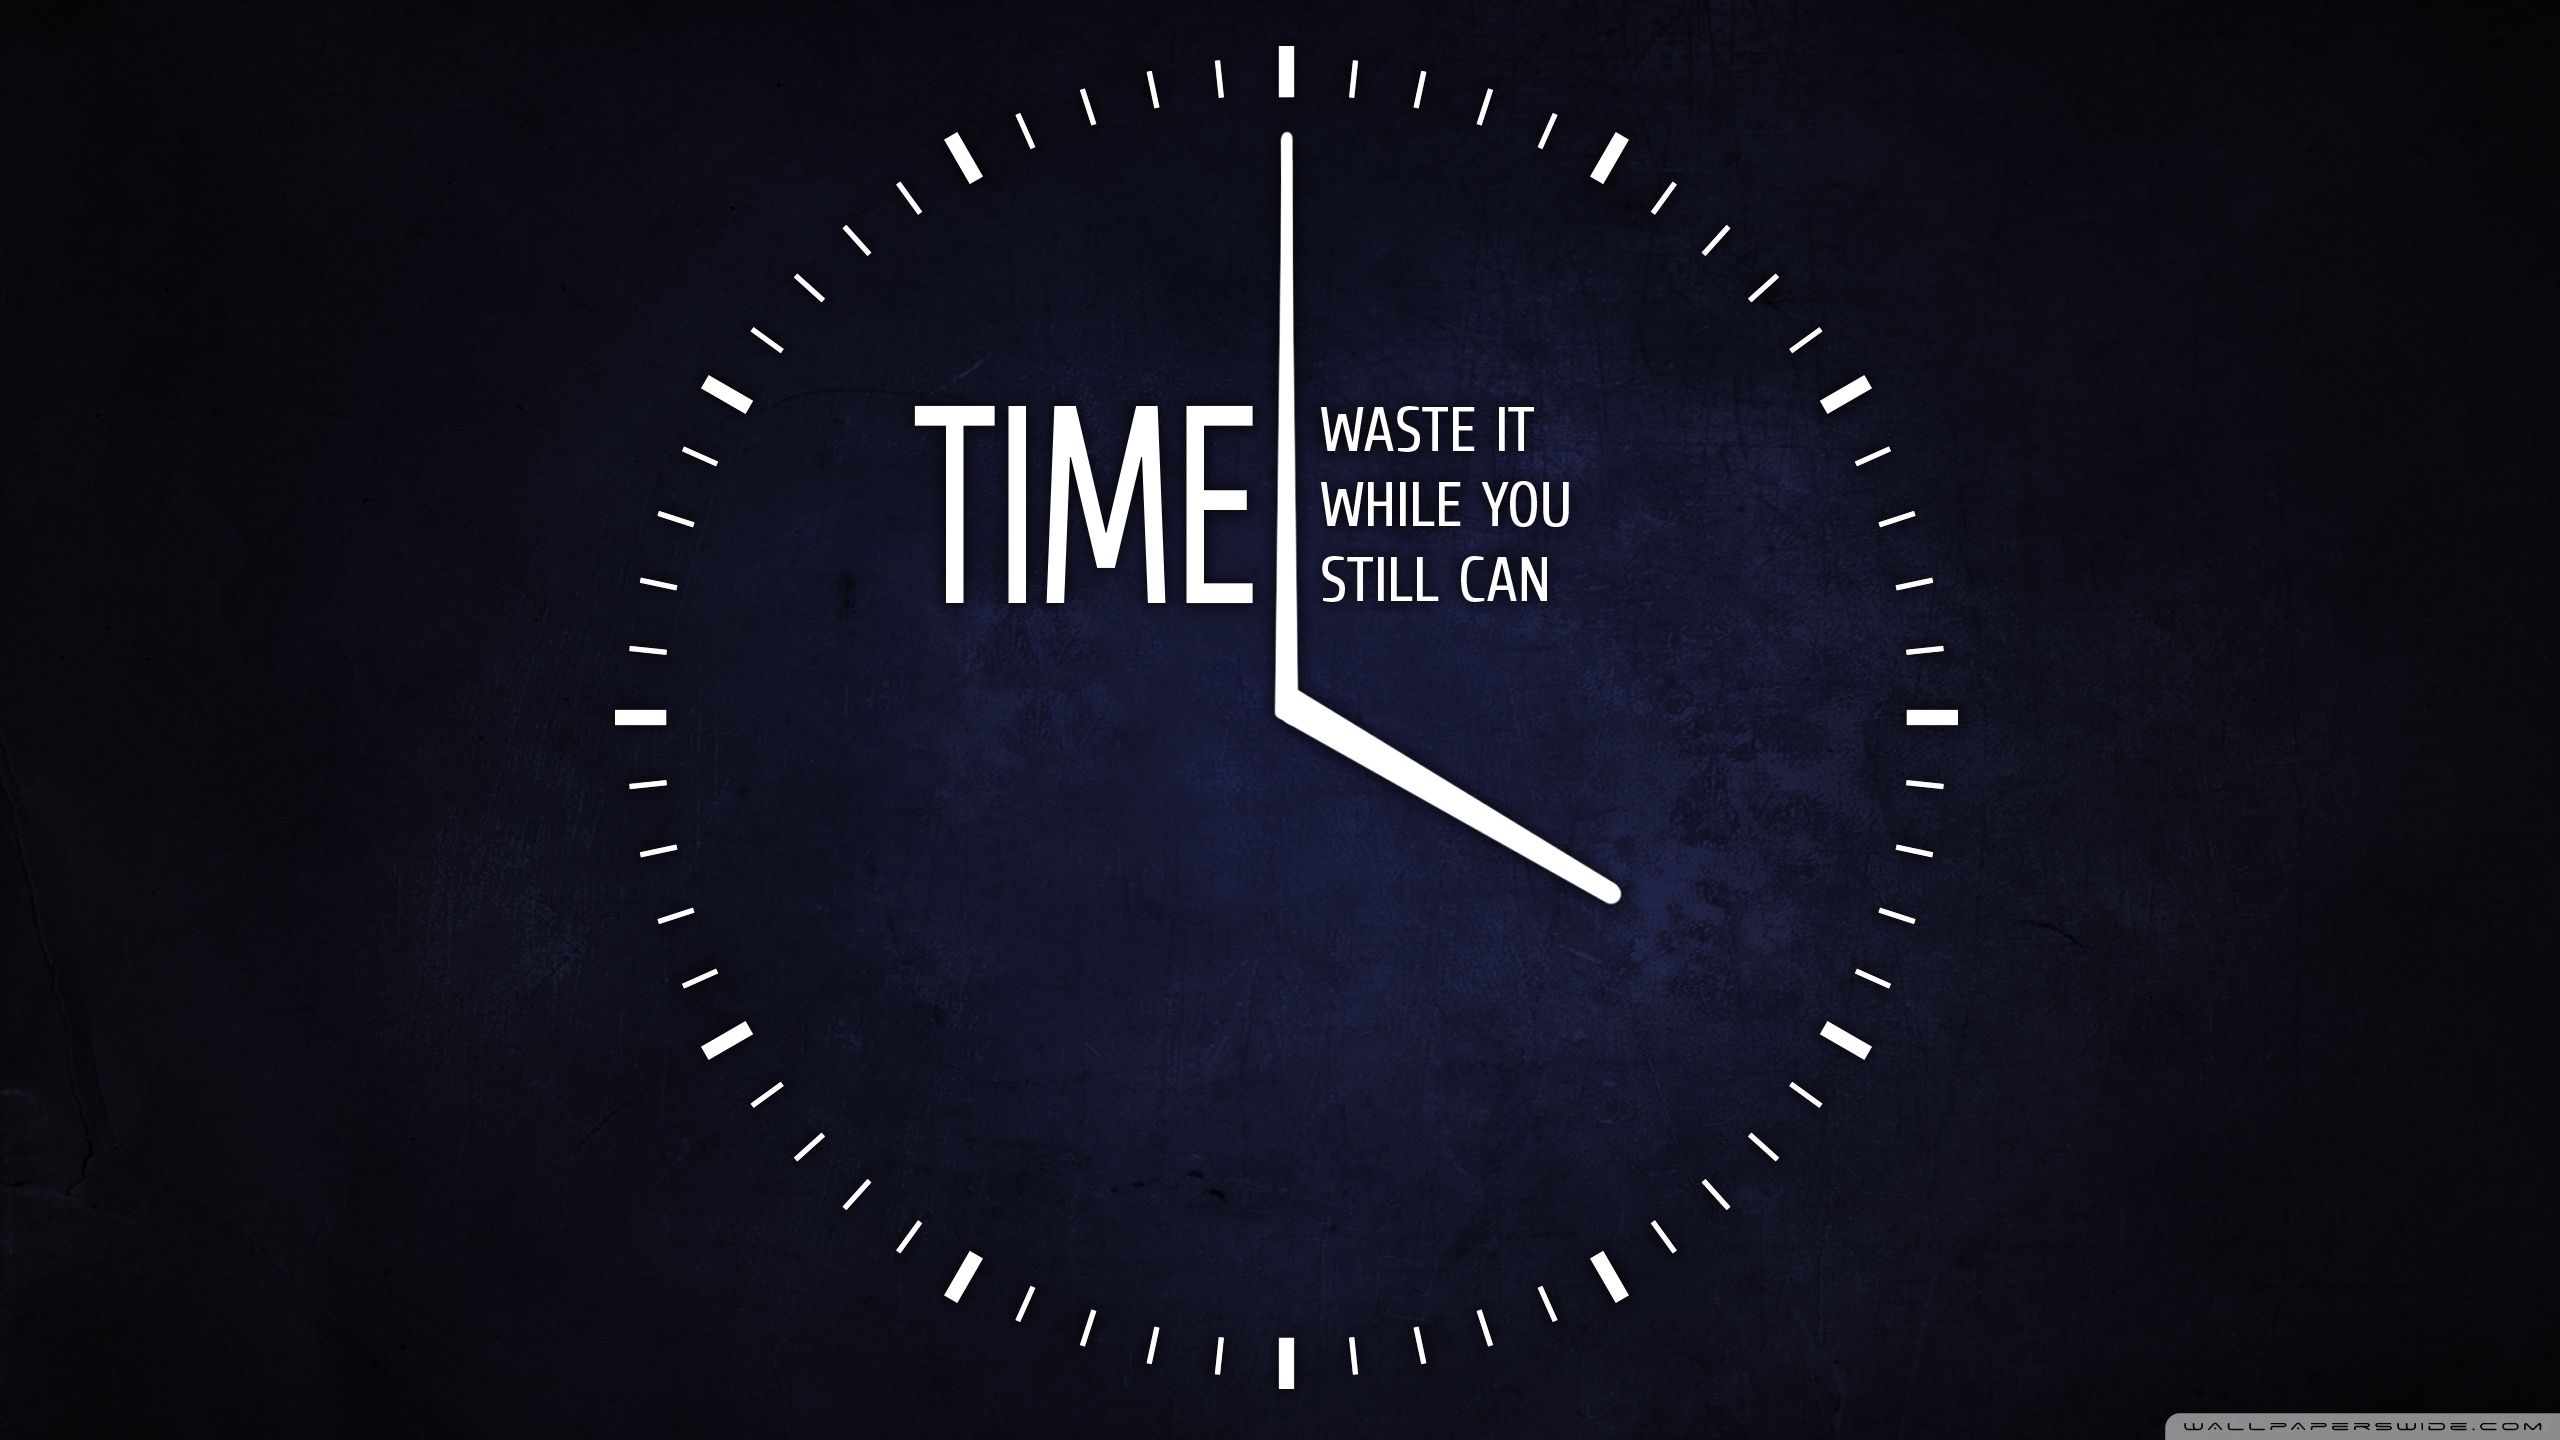 Time Clock wallpaper. Motivational quotes wallpaper, Clock wallpaper, Motivational wallpaper